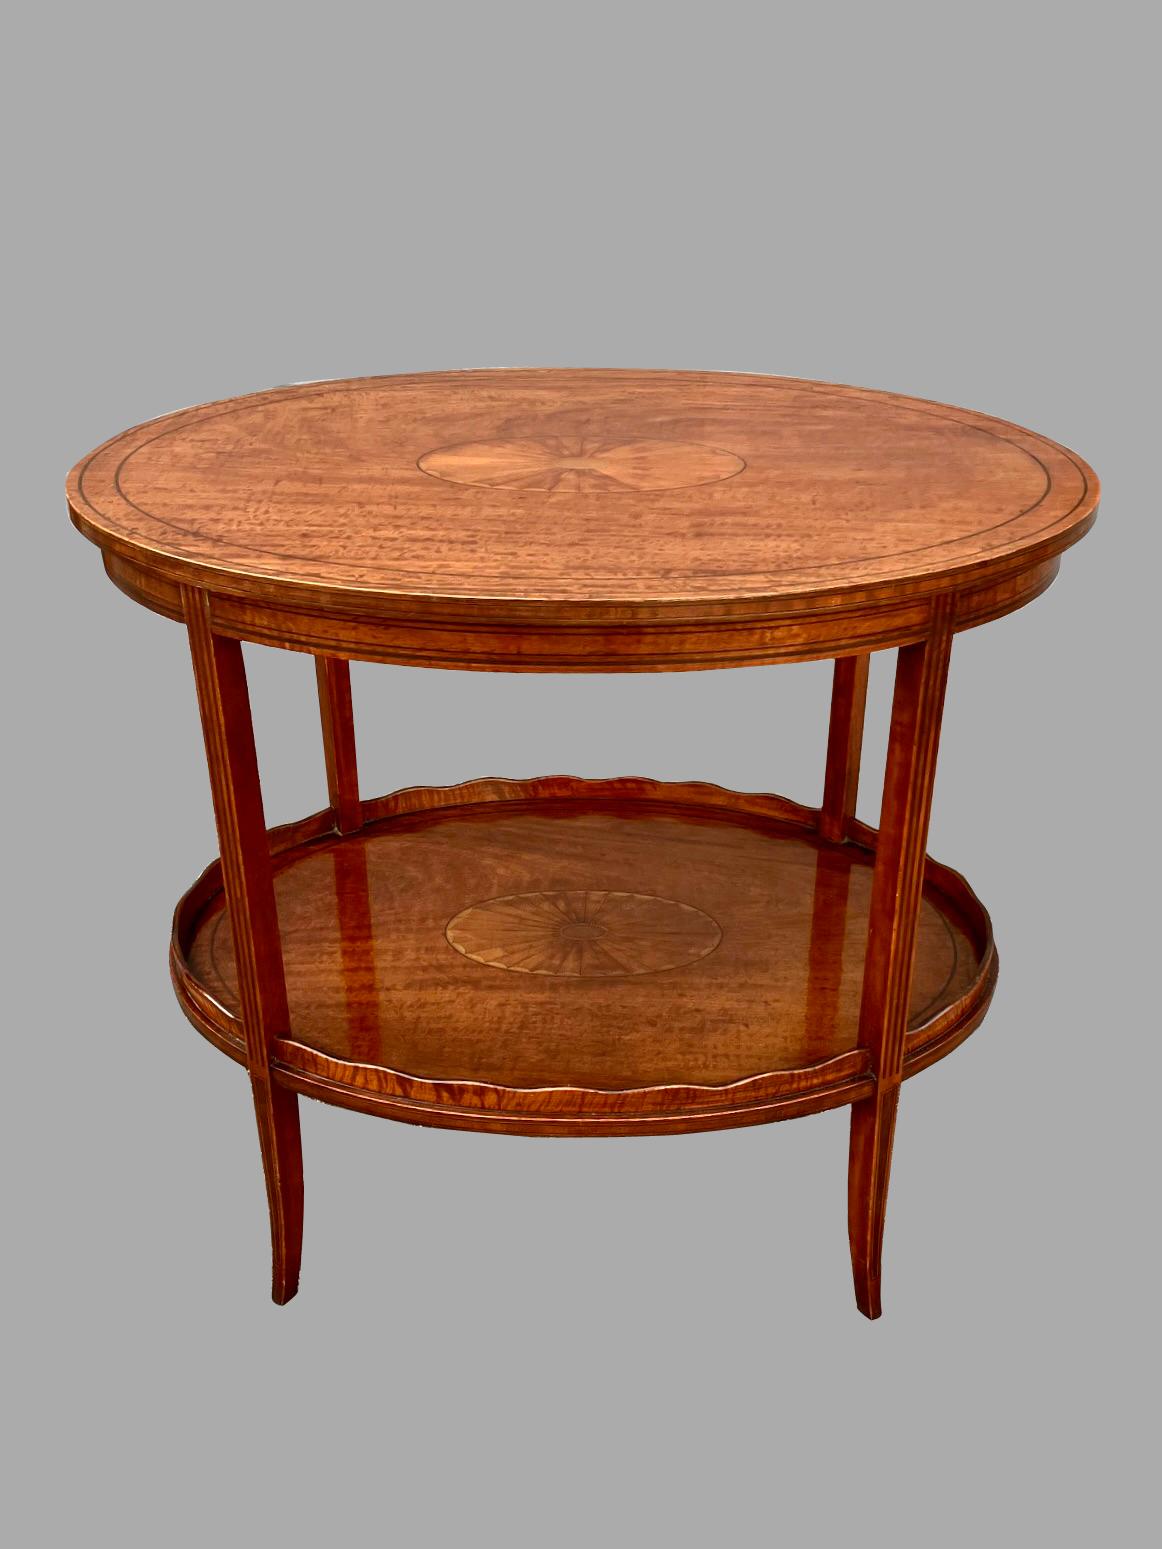 An English Hepplewhite style double tier occasional table, consisting of 2 satinwood oval surfaces each with a central boxwood inlaid paterae, the lower tier with a scalloped edge. The tops are joined with an inlaid Hepplewhite style curved leg. An